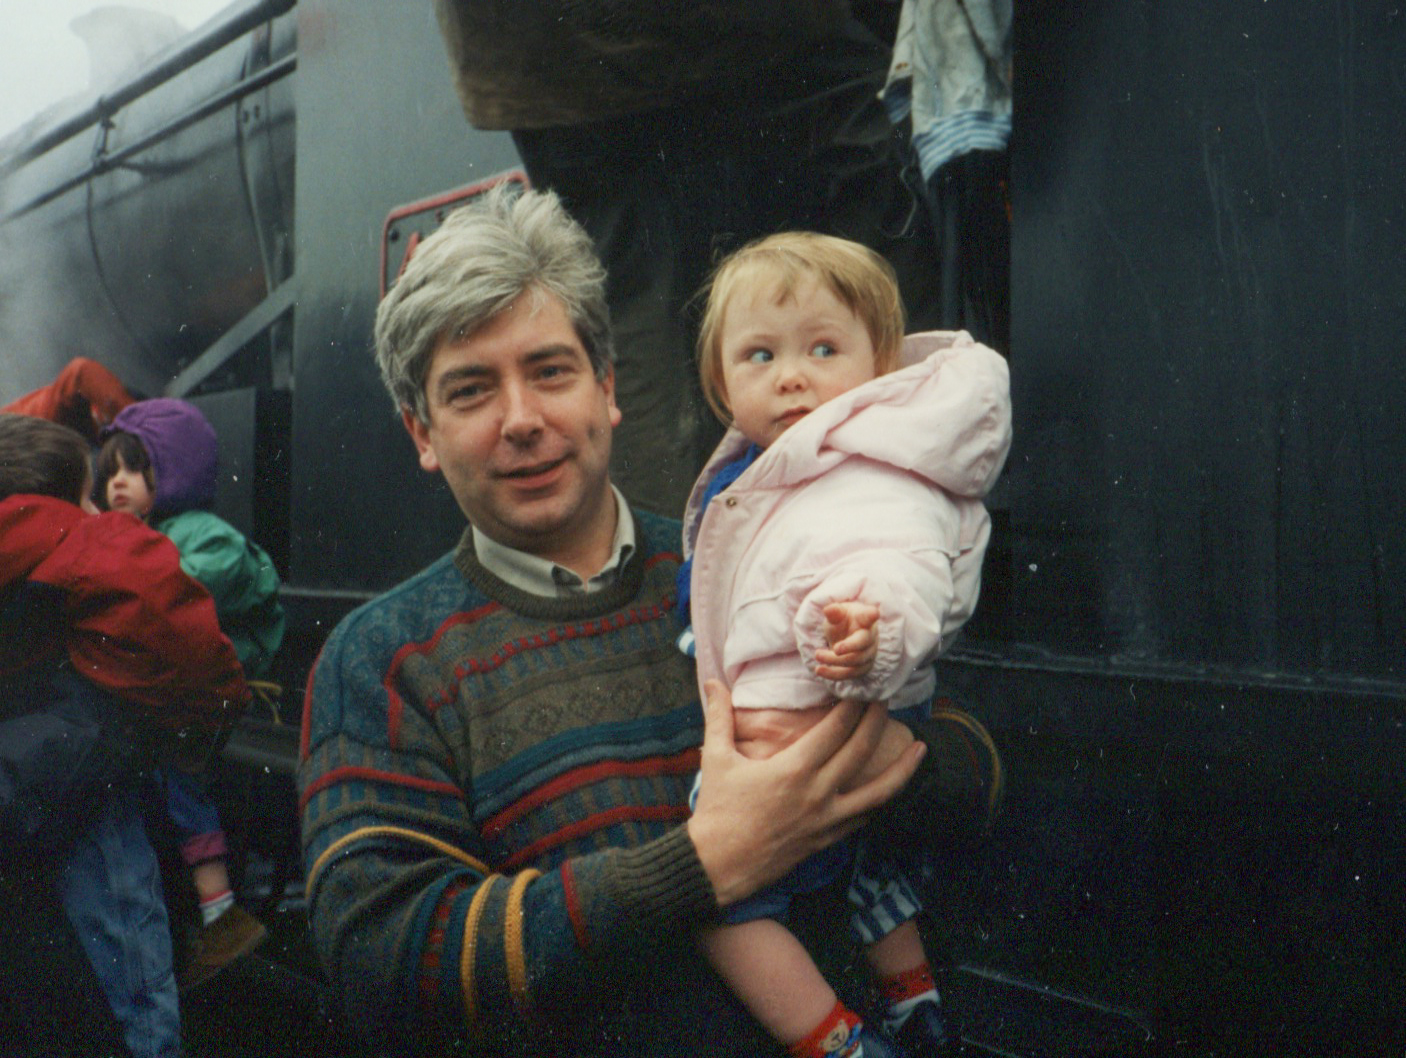 Alex with his daughter, Maeve, in 1993